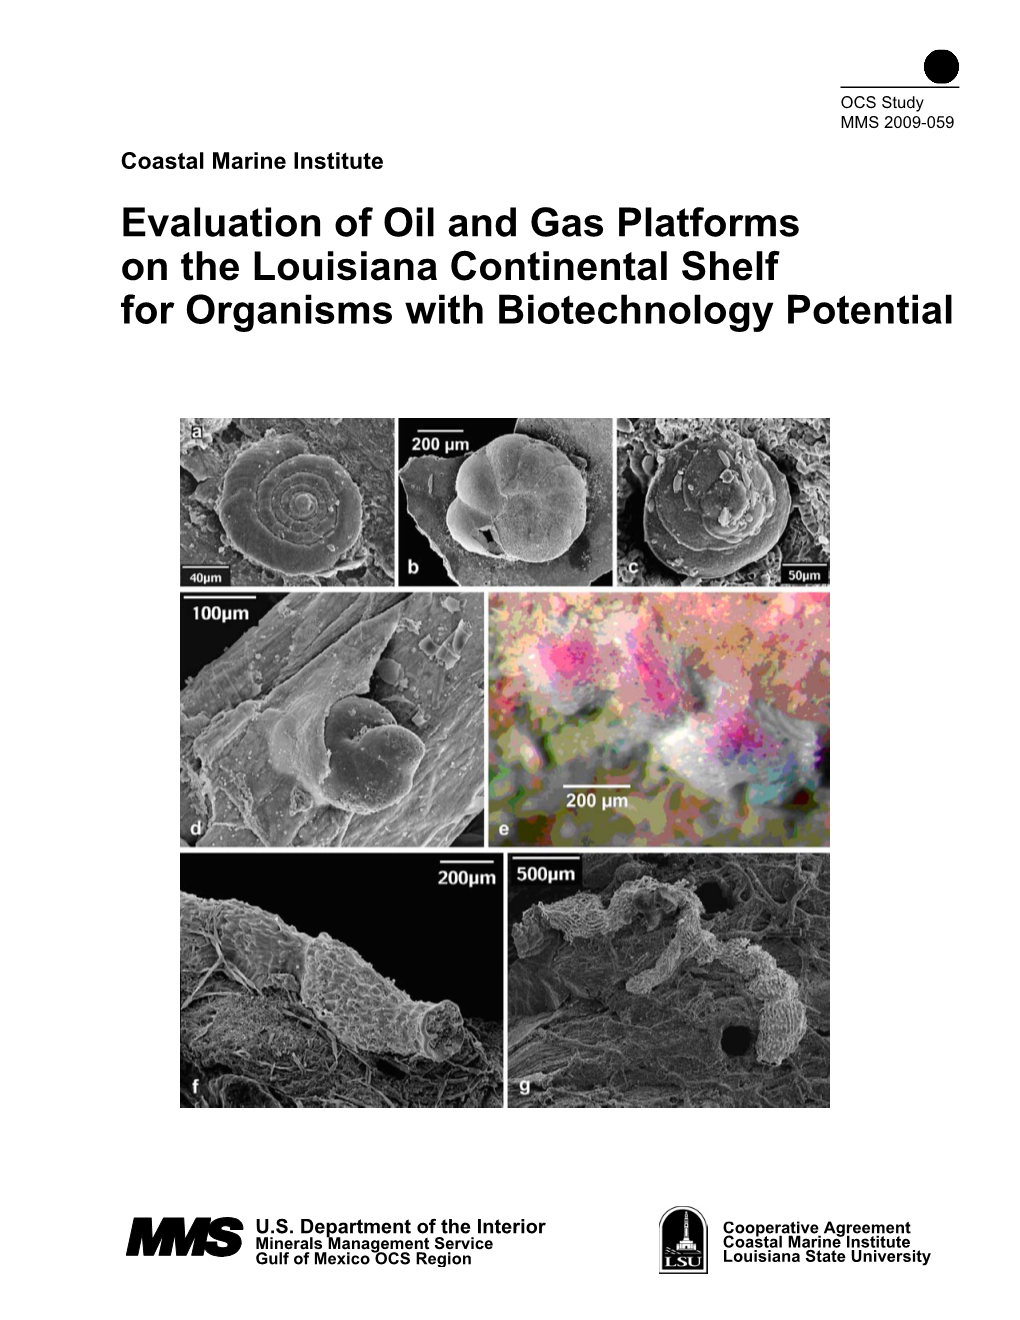 Evaluation of Oil and Gas Platforms on the Louisiana Continental Shelf for Organisms with Biotechnology Potential